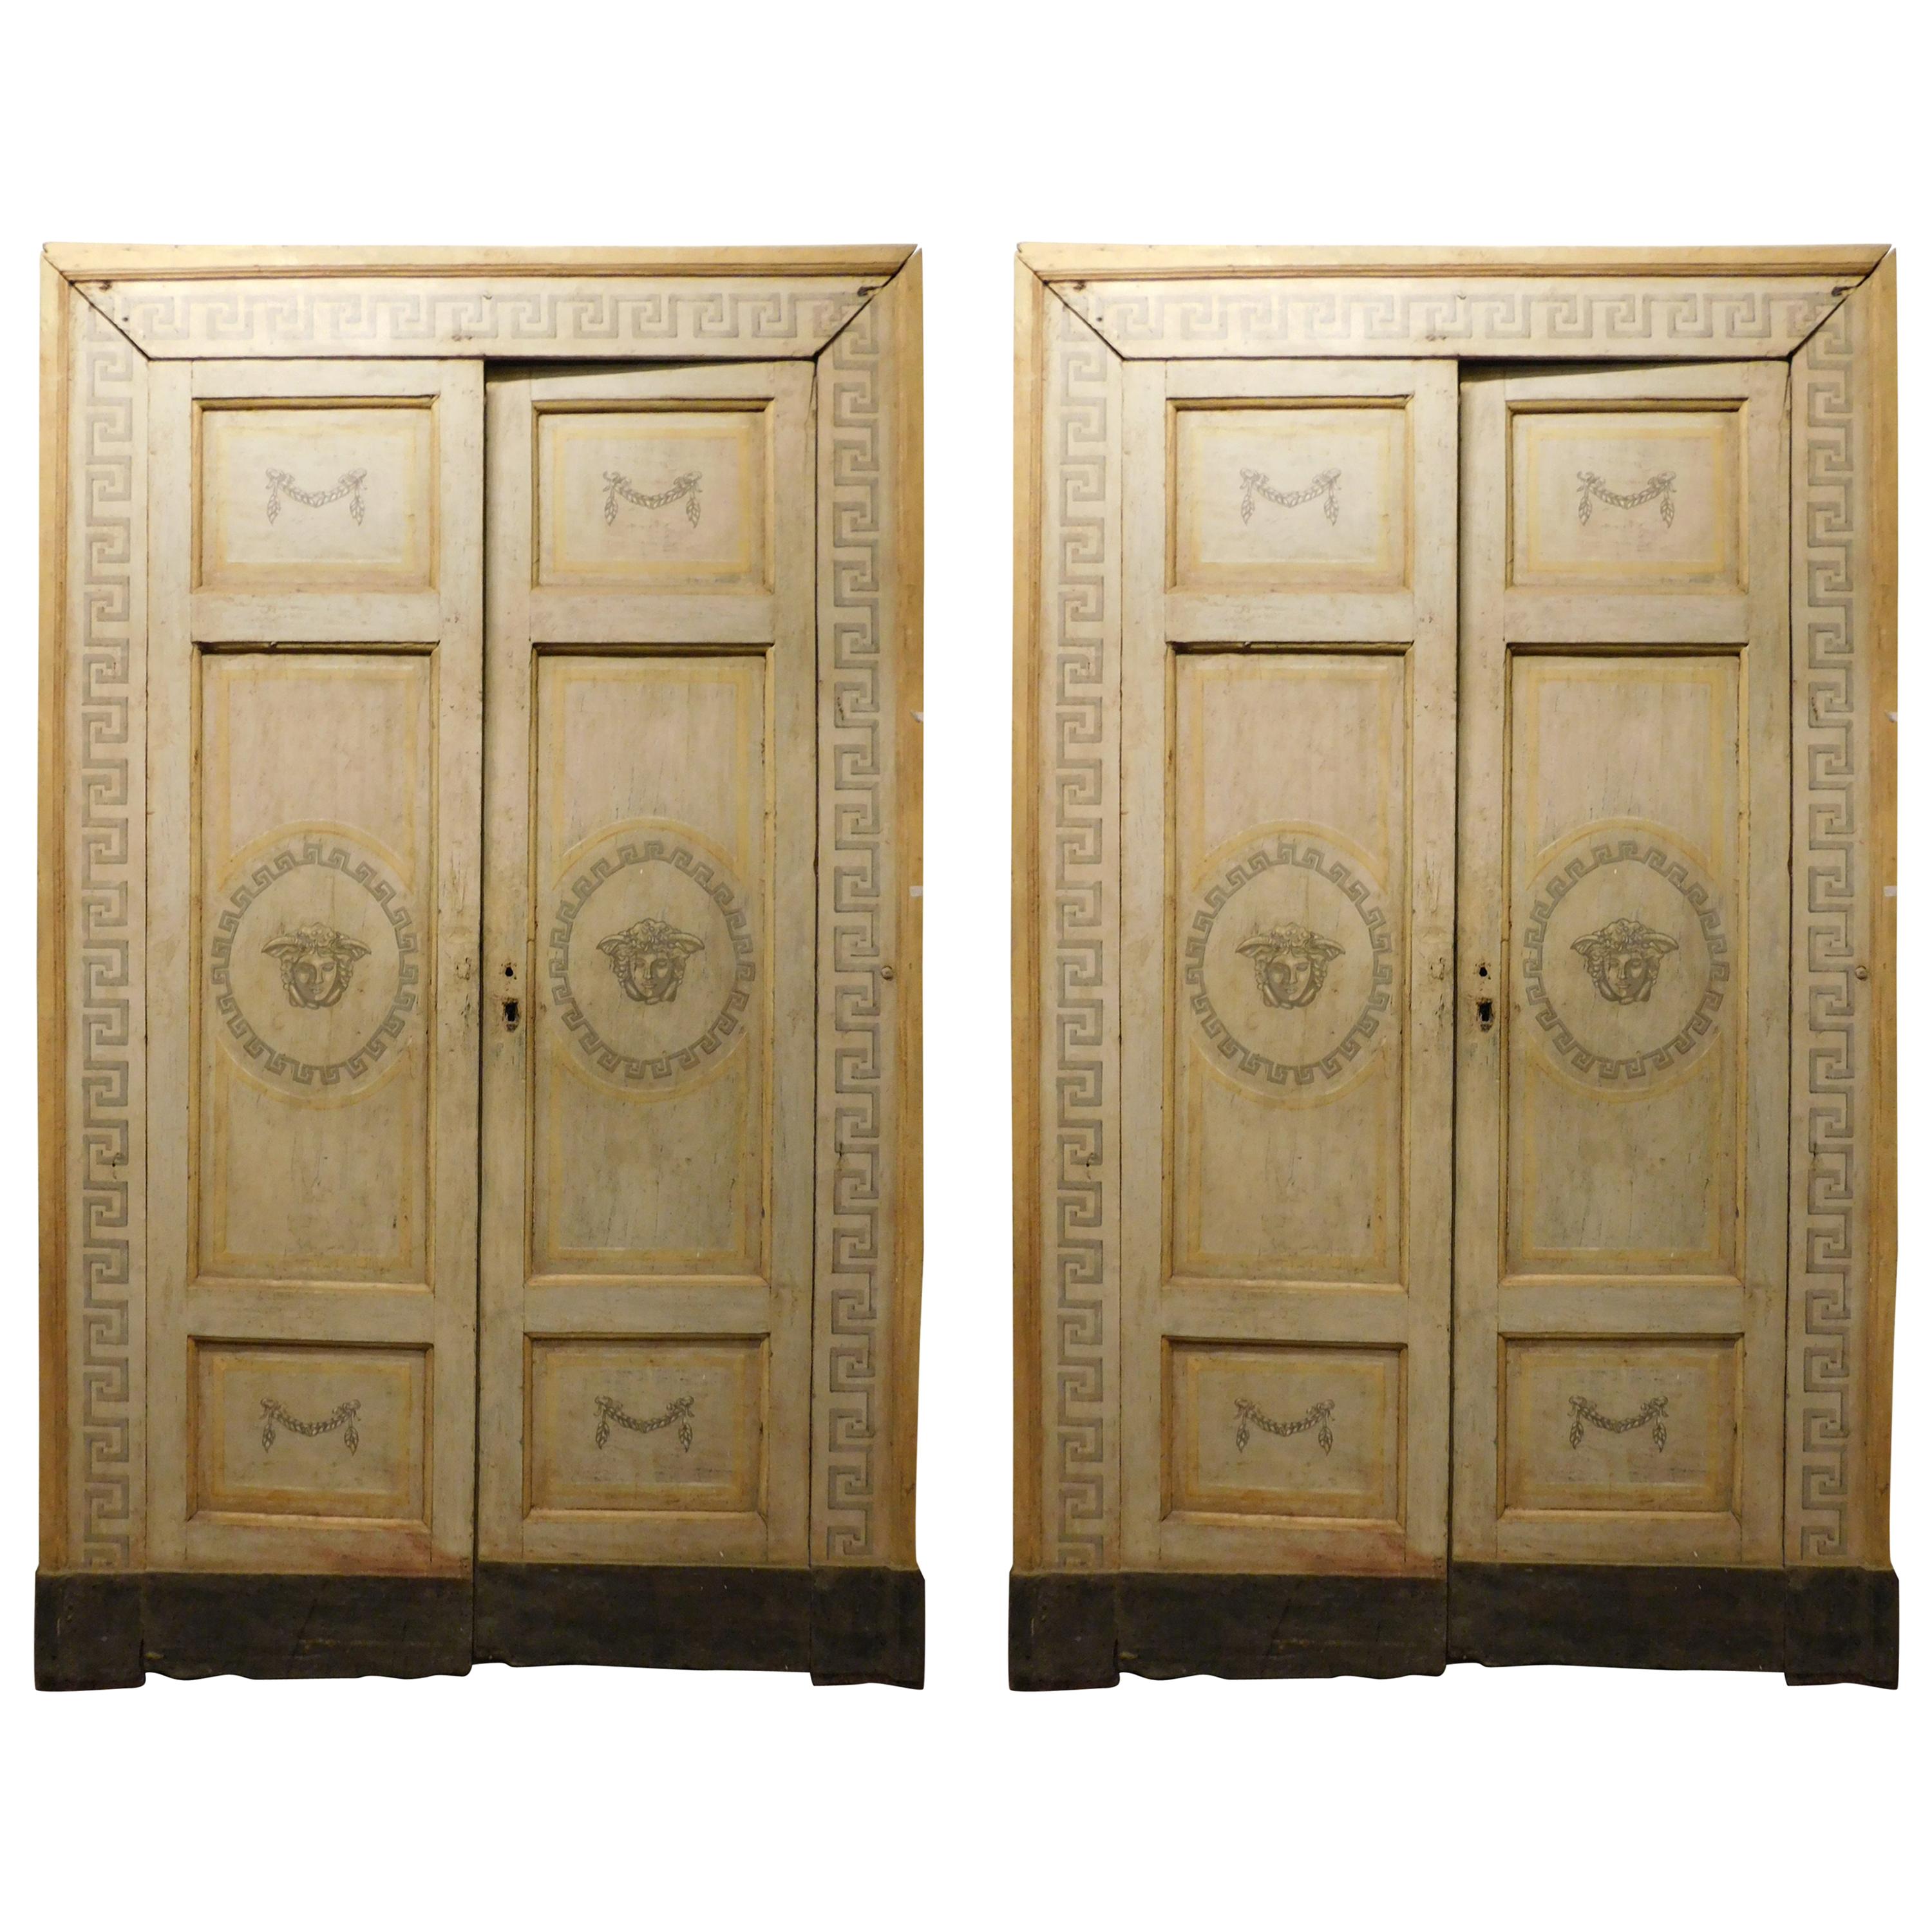 Pair of Antique Lacquered Double Doors with Frame, Medusa, 18th Century Italy